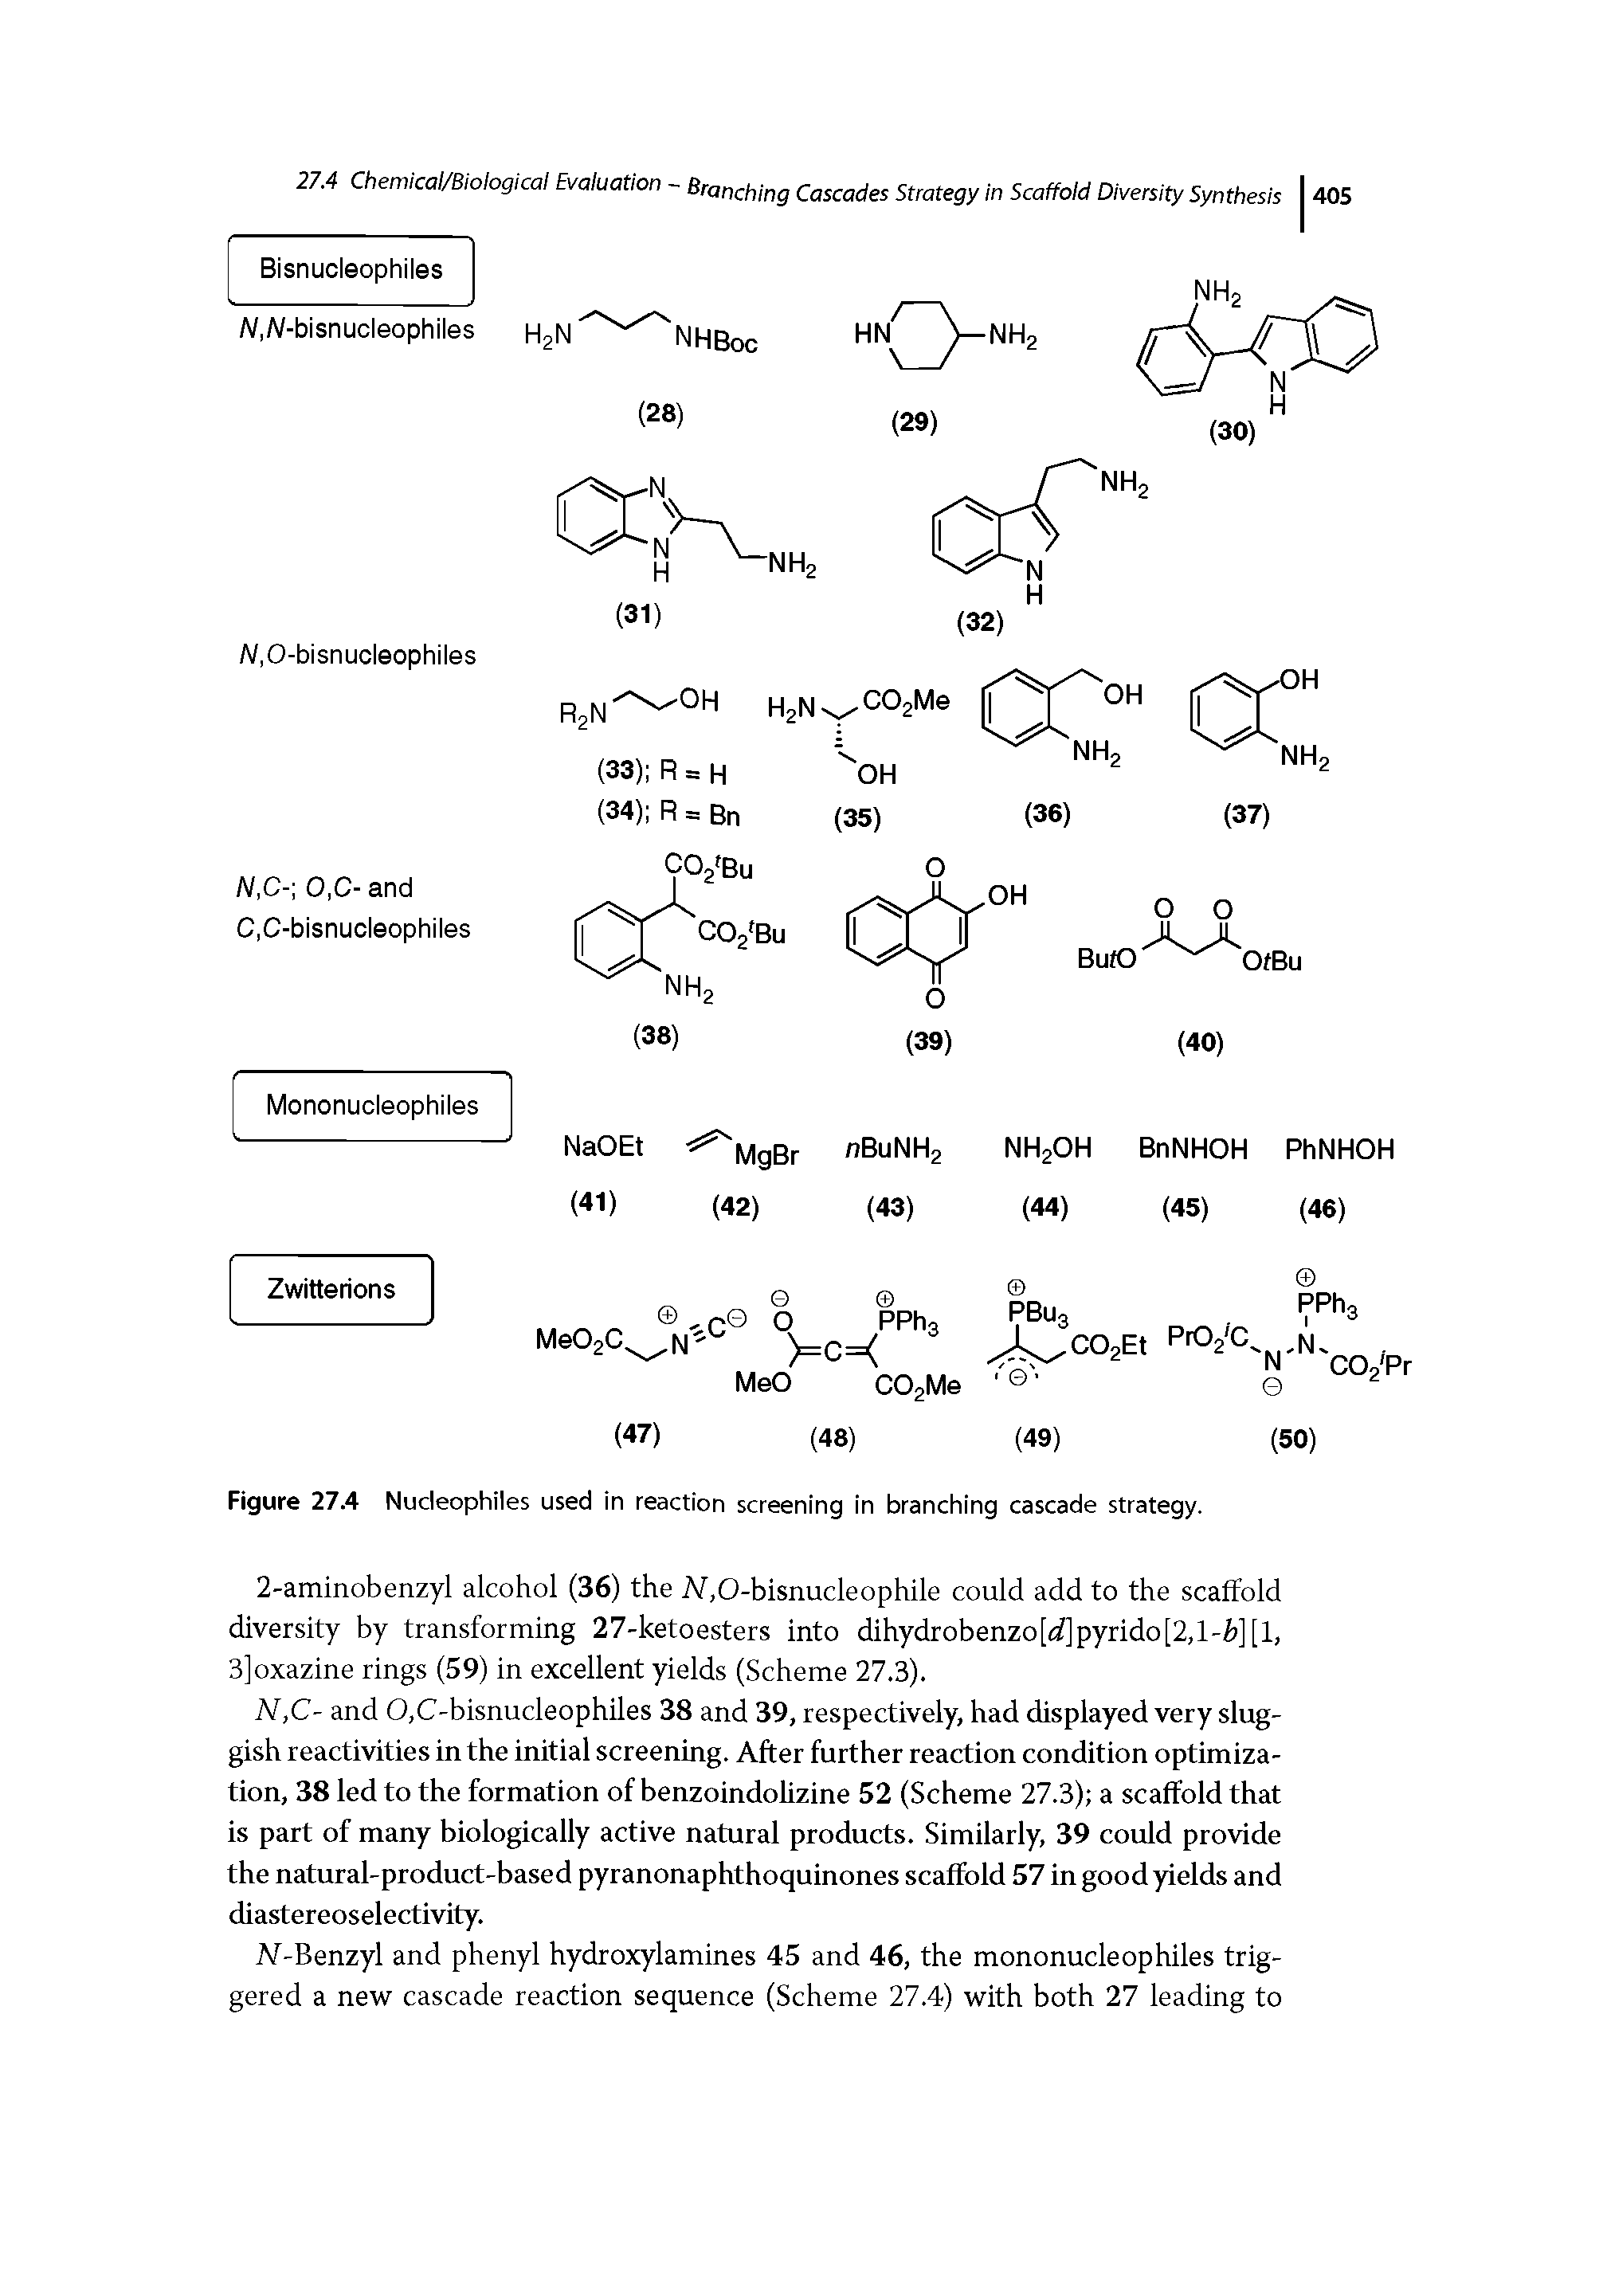 Figure 27.4 Nucleophiles used in reaction screening in branching cascade strategy.